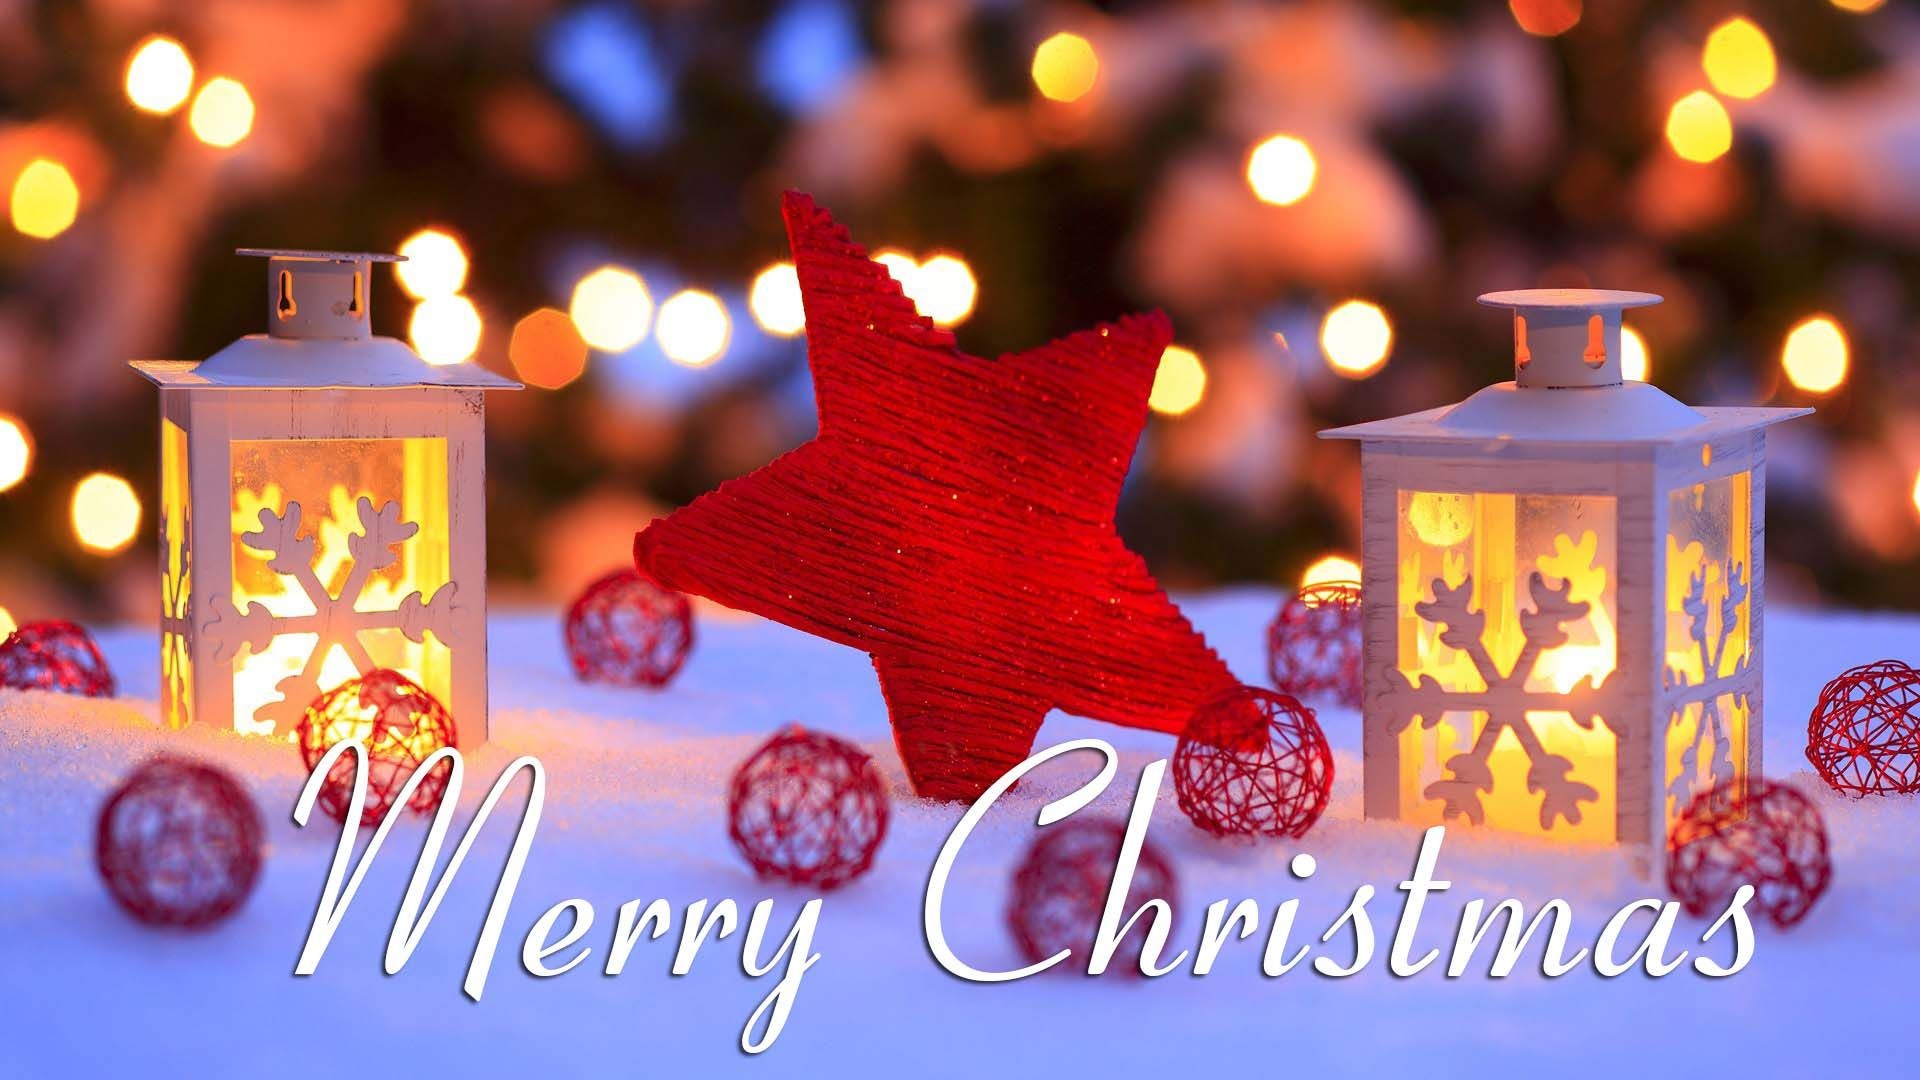 Merry Christmas 2017 : Christmas Quotes, Wishes, SMS, Greetings, Images and  Wallpapers